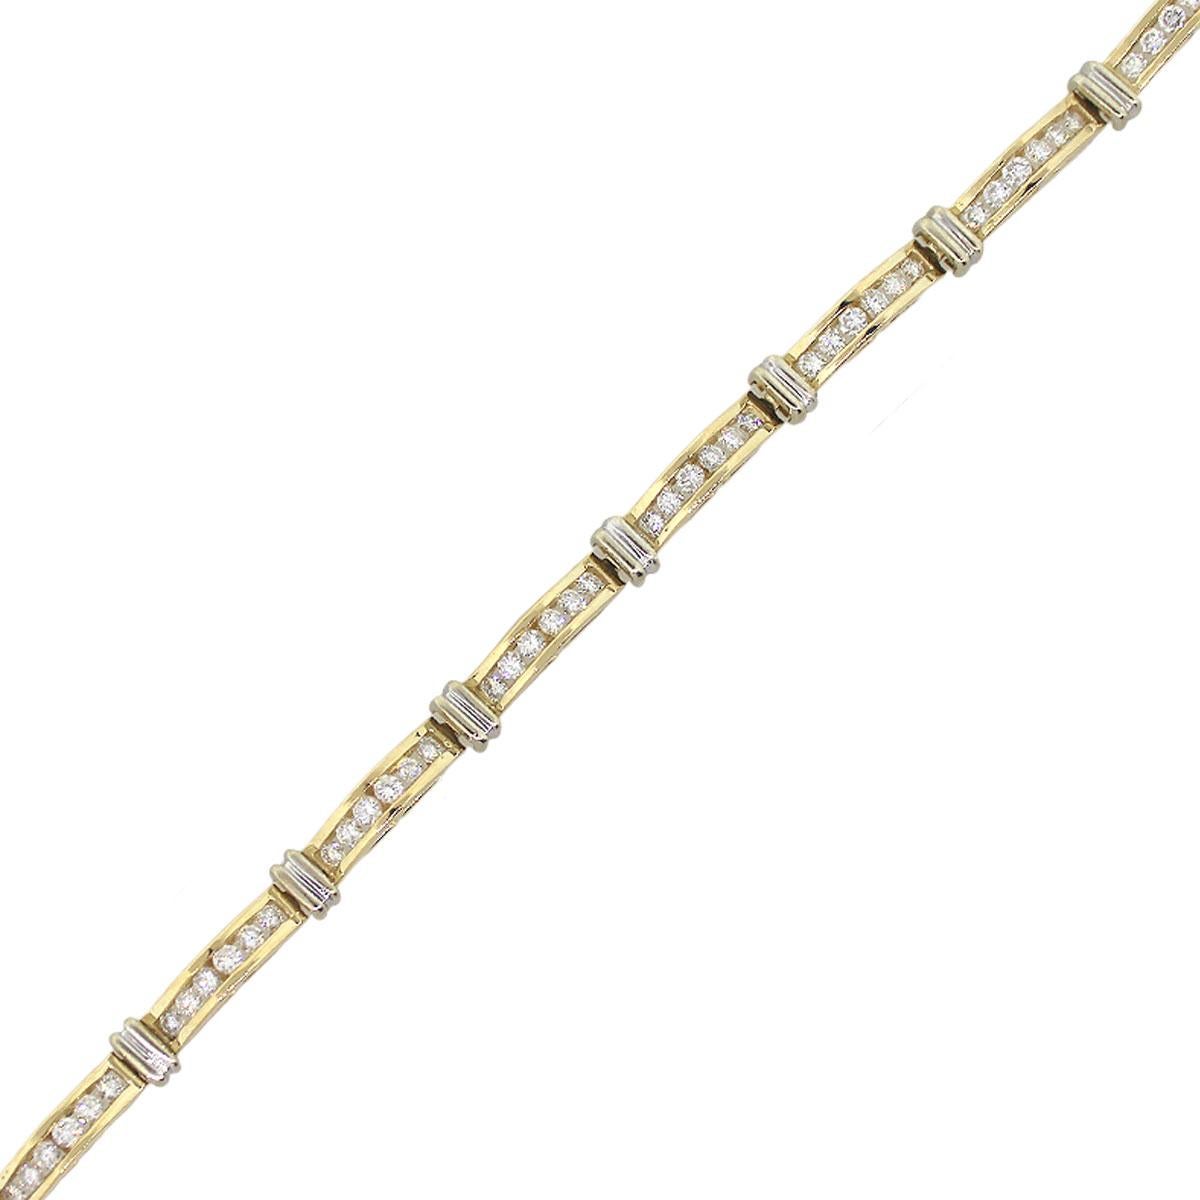 Material: 14k Yellow Gold and white gold
Diamond Details: Approx. 3.00ctw of round brilliant channel set diamonds. Diamonds are G/H in color and SI in clarity
Clasp: Tongue in box with safety latch
Measurement: It will fit up to a 7″ wrist
Total